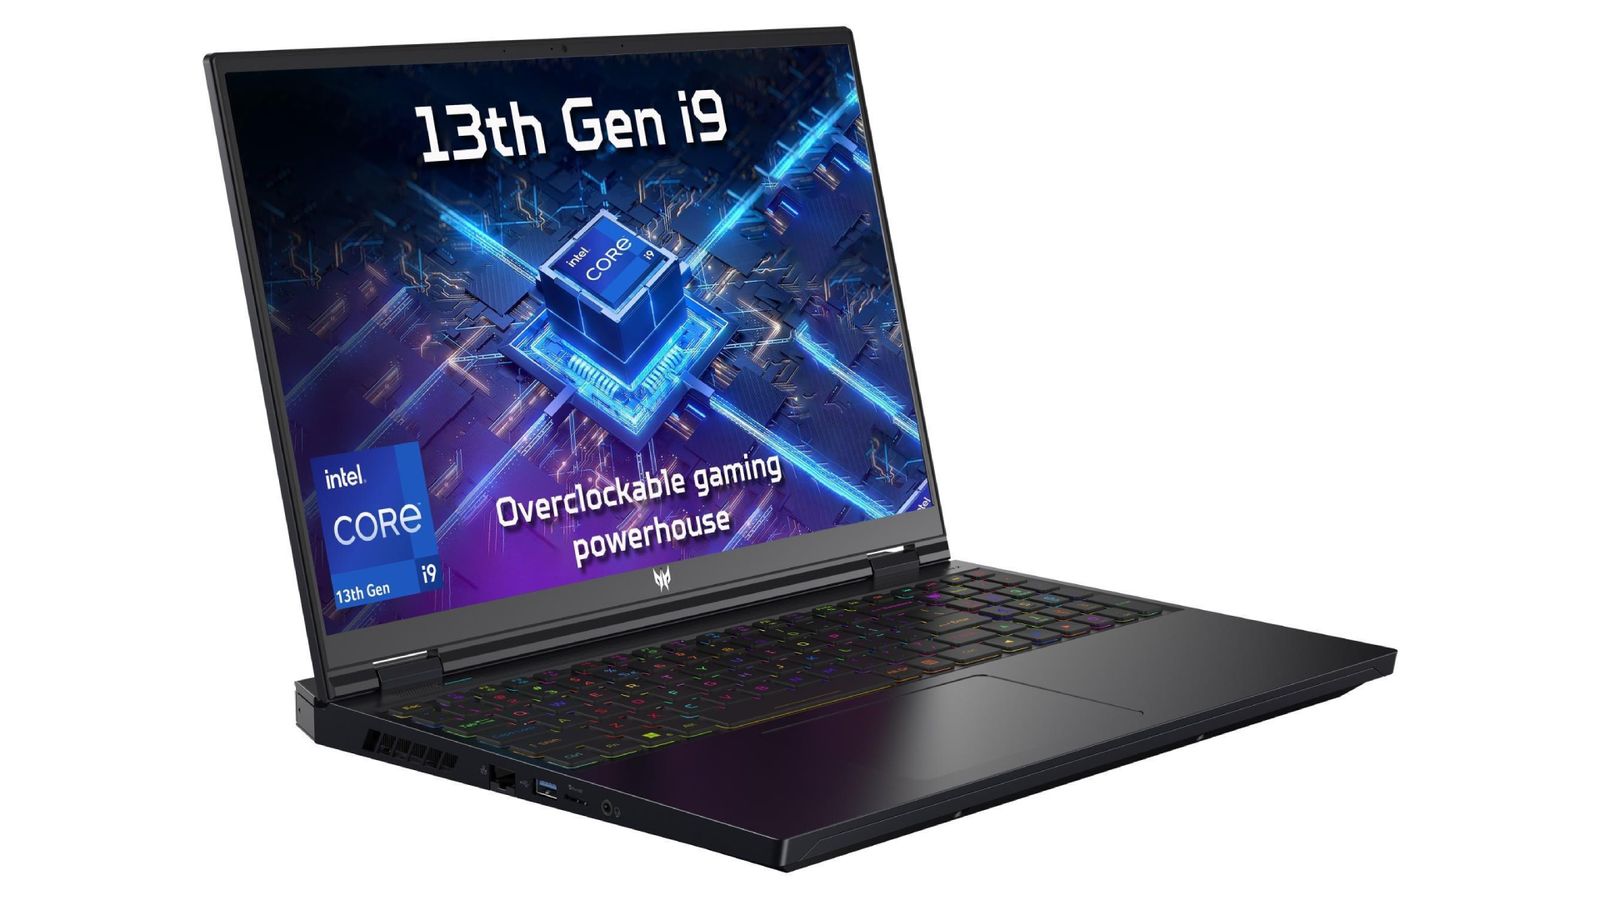 Best Final Fantasy XVI gaming laptop - Acer Predator Helios 16 product image of a black laptop featuring multi-coloured backlit keys and a graphic for the 13th Gen Intel Core i9 processor on the display in blue.